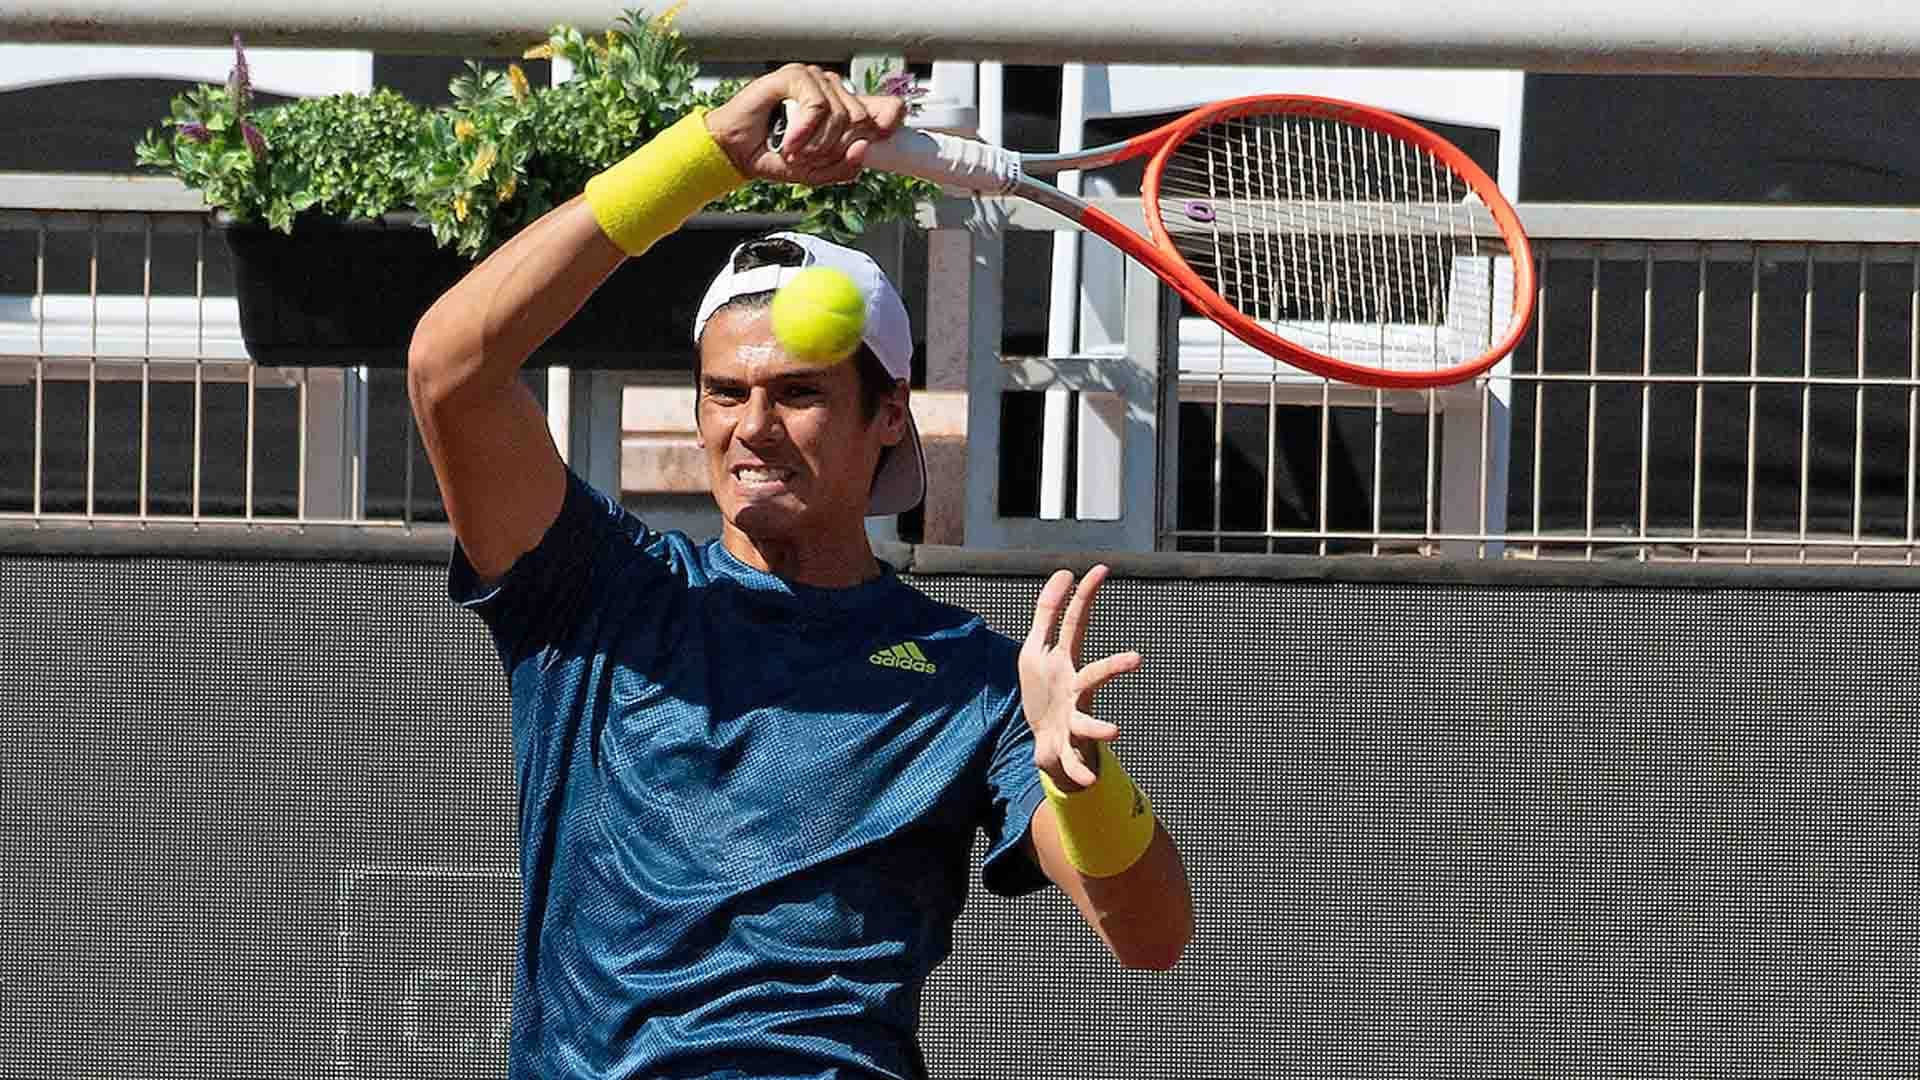 Seventh seed Federico Coria reaches the second round at the Chile Dove Men+Care Open after defeating Gianluca Mager 4-6, 7-6(4), 7-6(4).